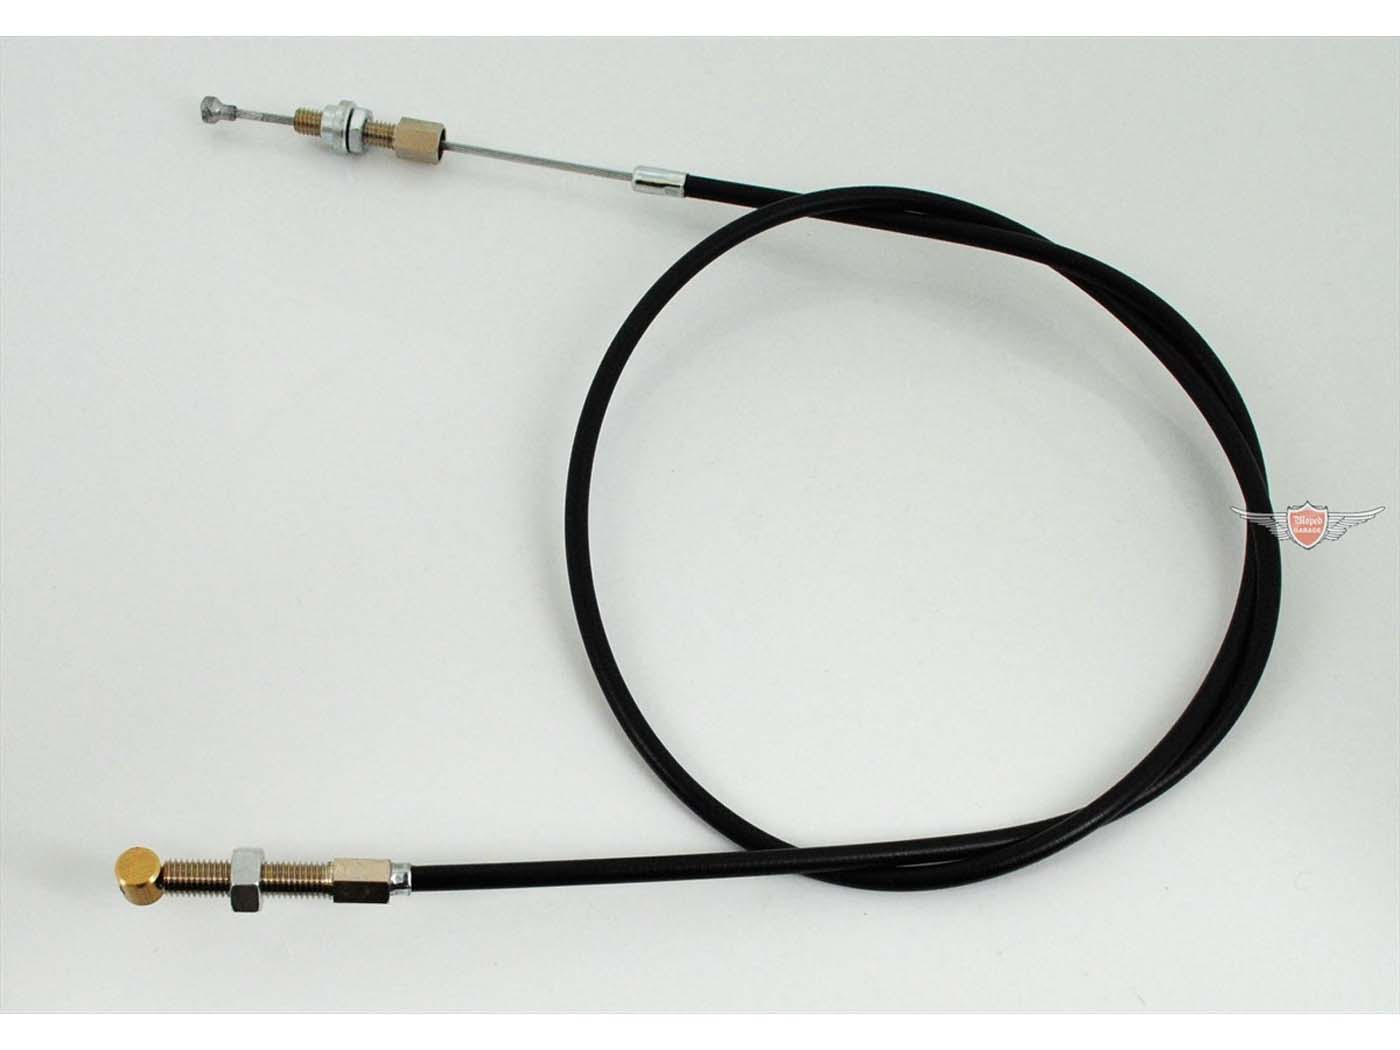 Component Brake Brake Hand Brake Cable Ready To Install For Vehicle Brand Puch Vehicles M 50 SE